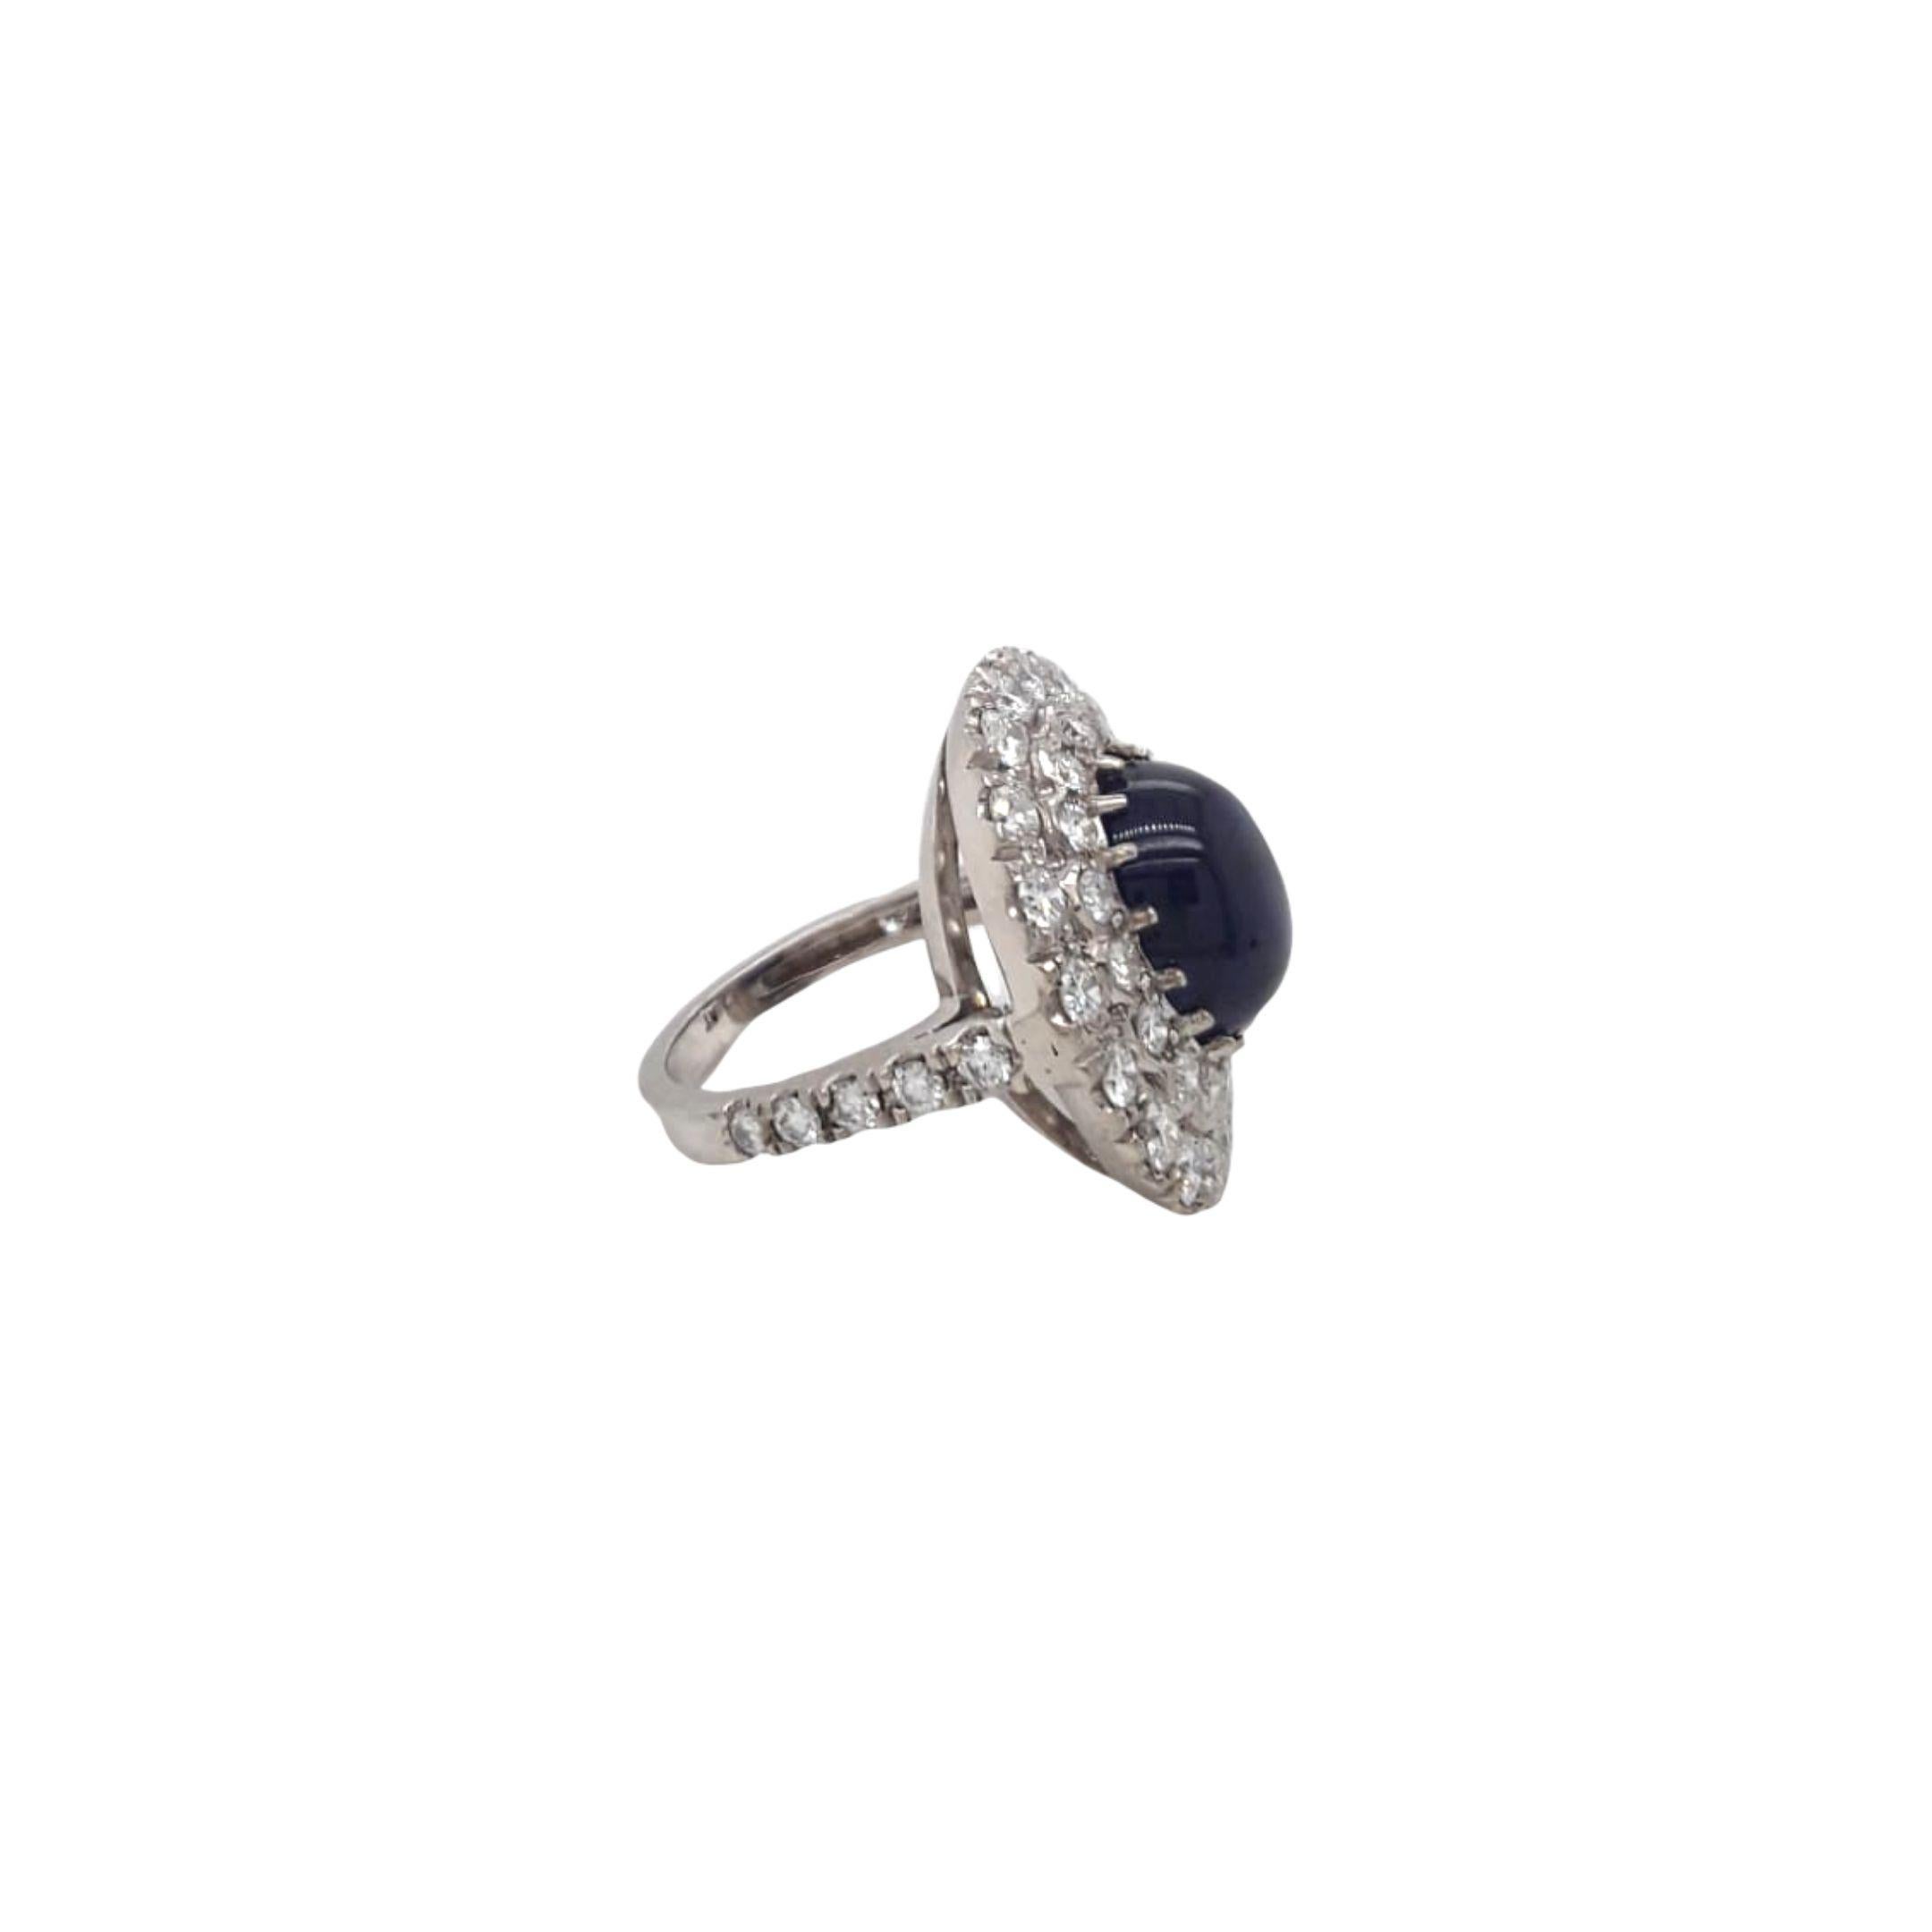 Antique Style Diamond and Cabouchon Sapphire Ring made with natural sapphires and brilliant cut diamonds. Sapphire Quantity: 1 oval sapphire, Sapphire Weight: 6.70 carats. Diamond Quantity: 45 round diamonds (0.03-0.05pts), Diamond Total Weight: